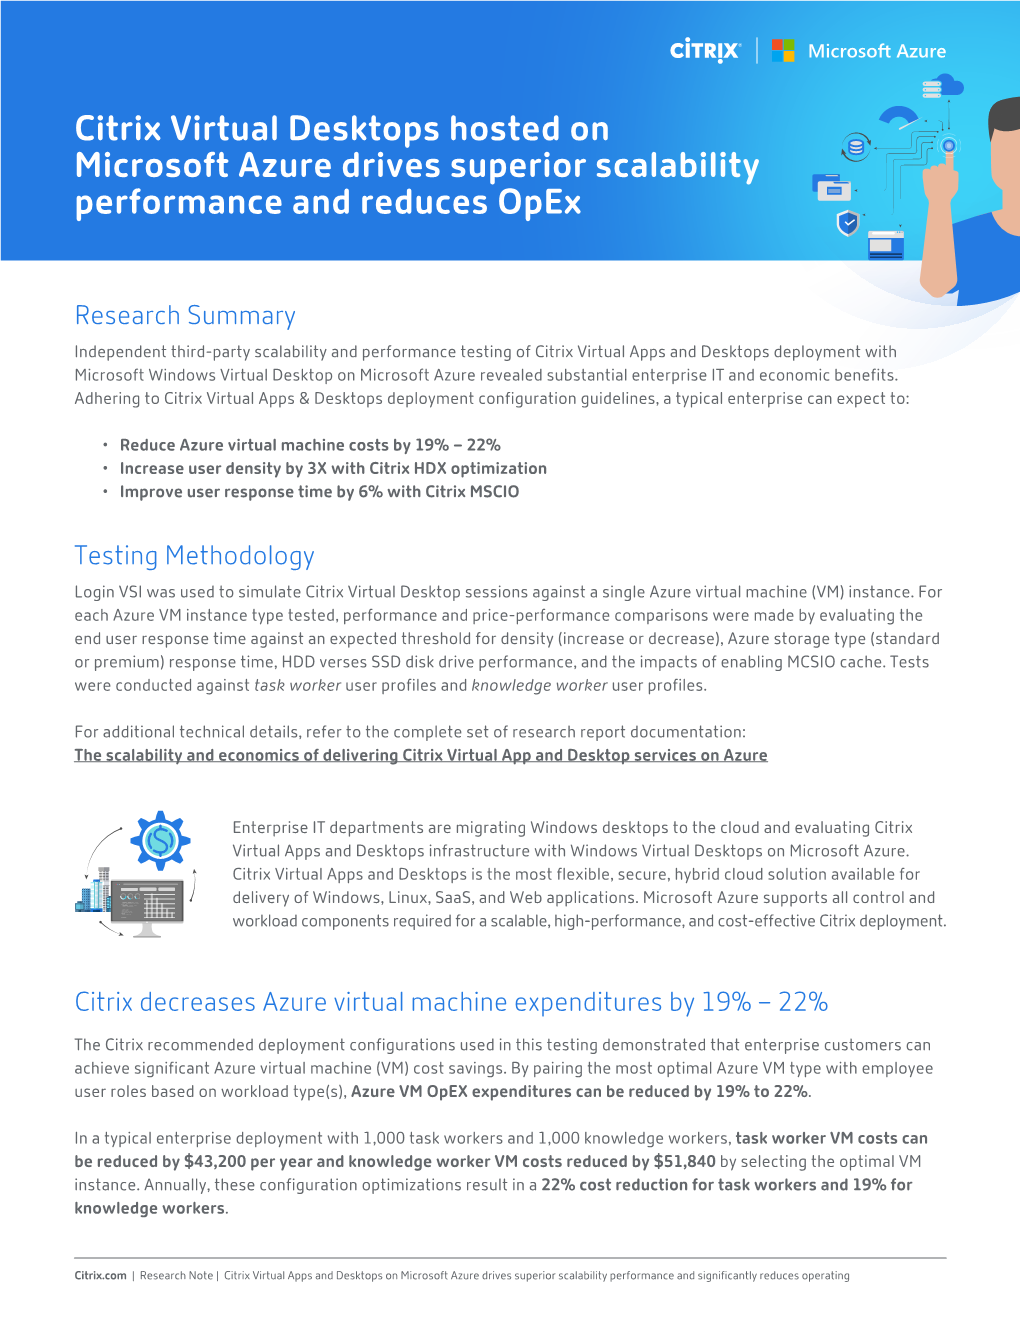 Citrix Virtual Desktops Hosted on Microsoft Azure Drives Superior Scalability Performance and Reduces Opex